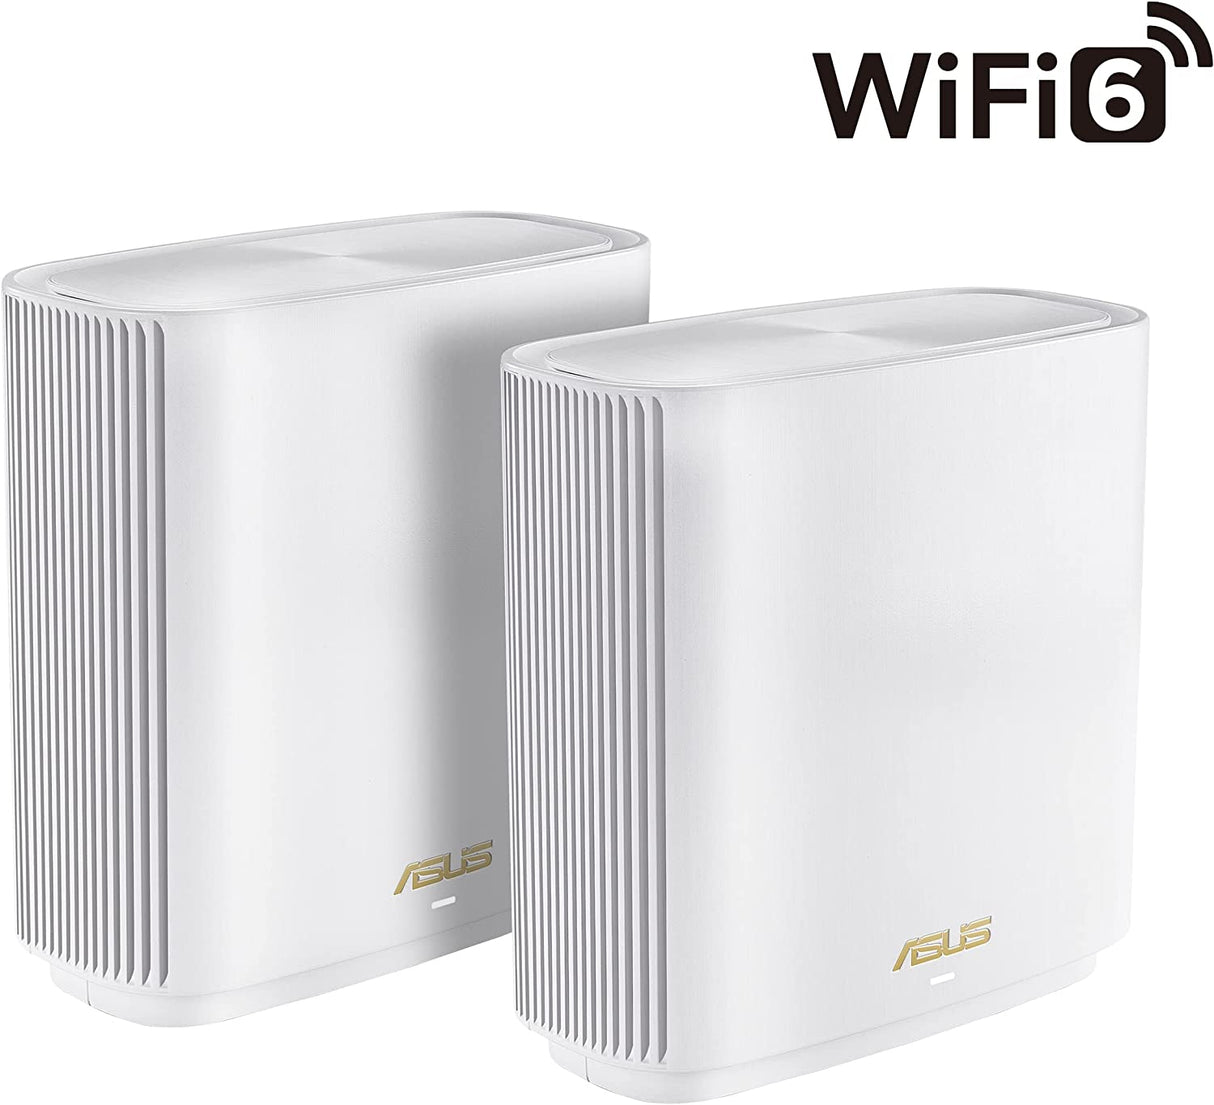 ASUS ZenWiFi XT9 AX7800 Tri-Band WiFi6 Mesh WiFiSystem (2Pack), 802.11ax, up to 5700 sq ft &amp; 6+ Rooms, AiMesh, Lifetime Free Internet Security, Parental Controls, 2.5G WAN Port, UNII 4, White